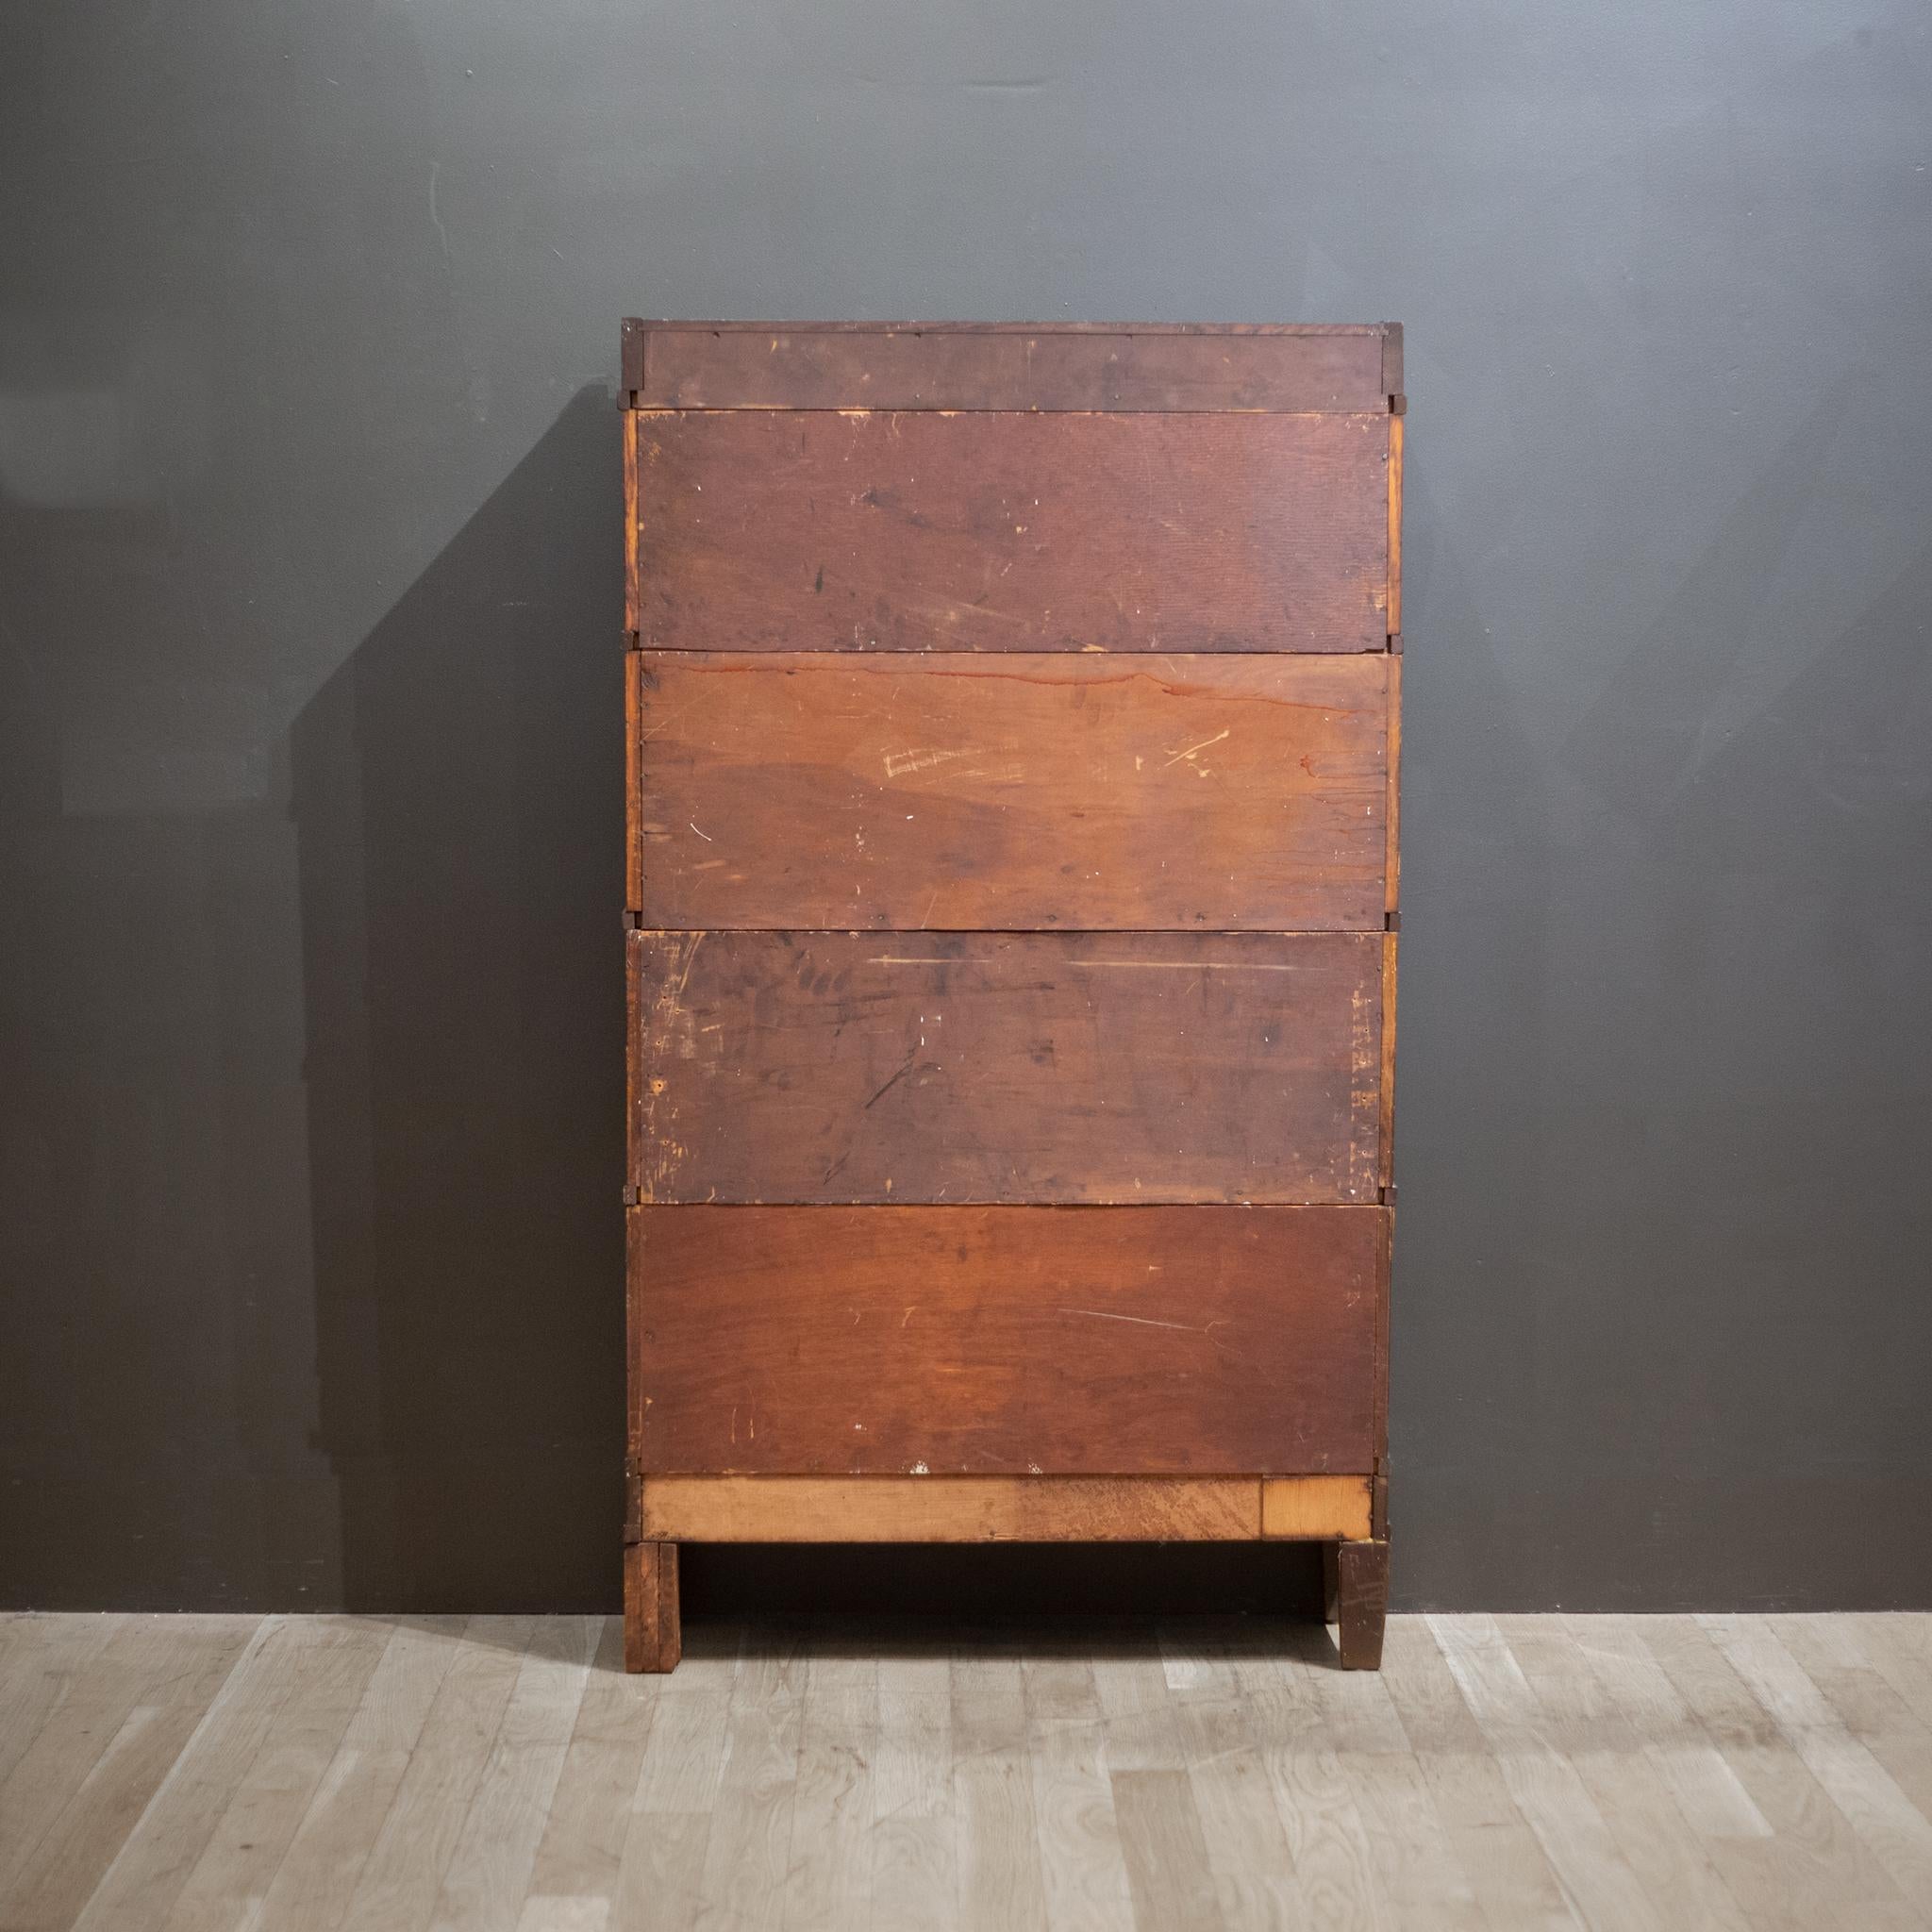 Industrial Early 20th C. Globe-Wernicke 4 Stack Lawyer's Bookcase, c.1910-1920